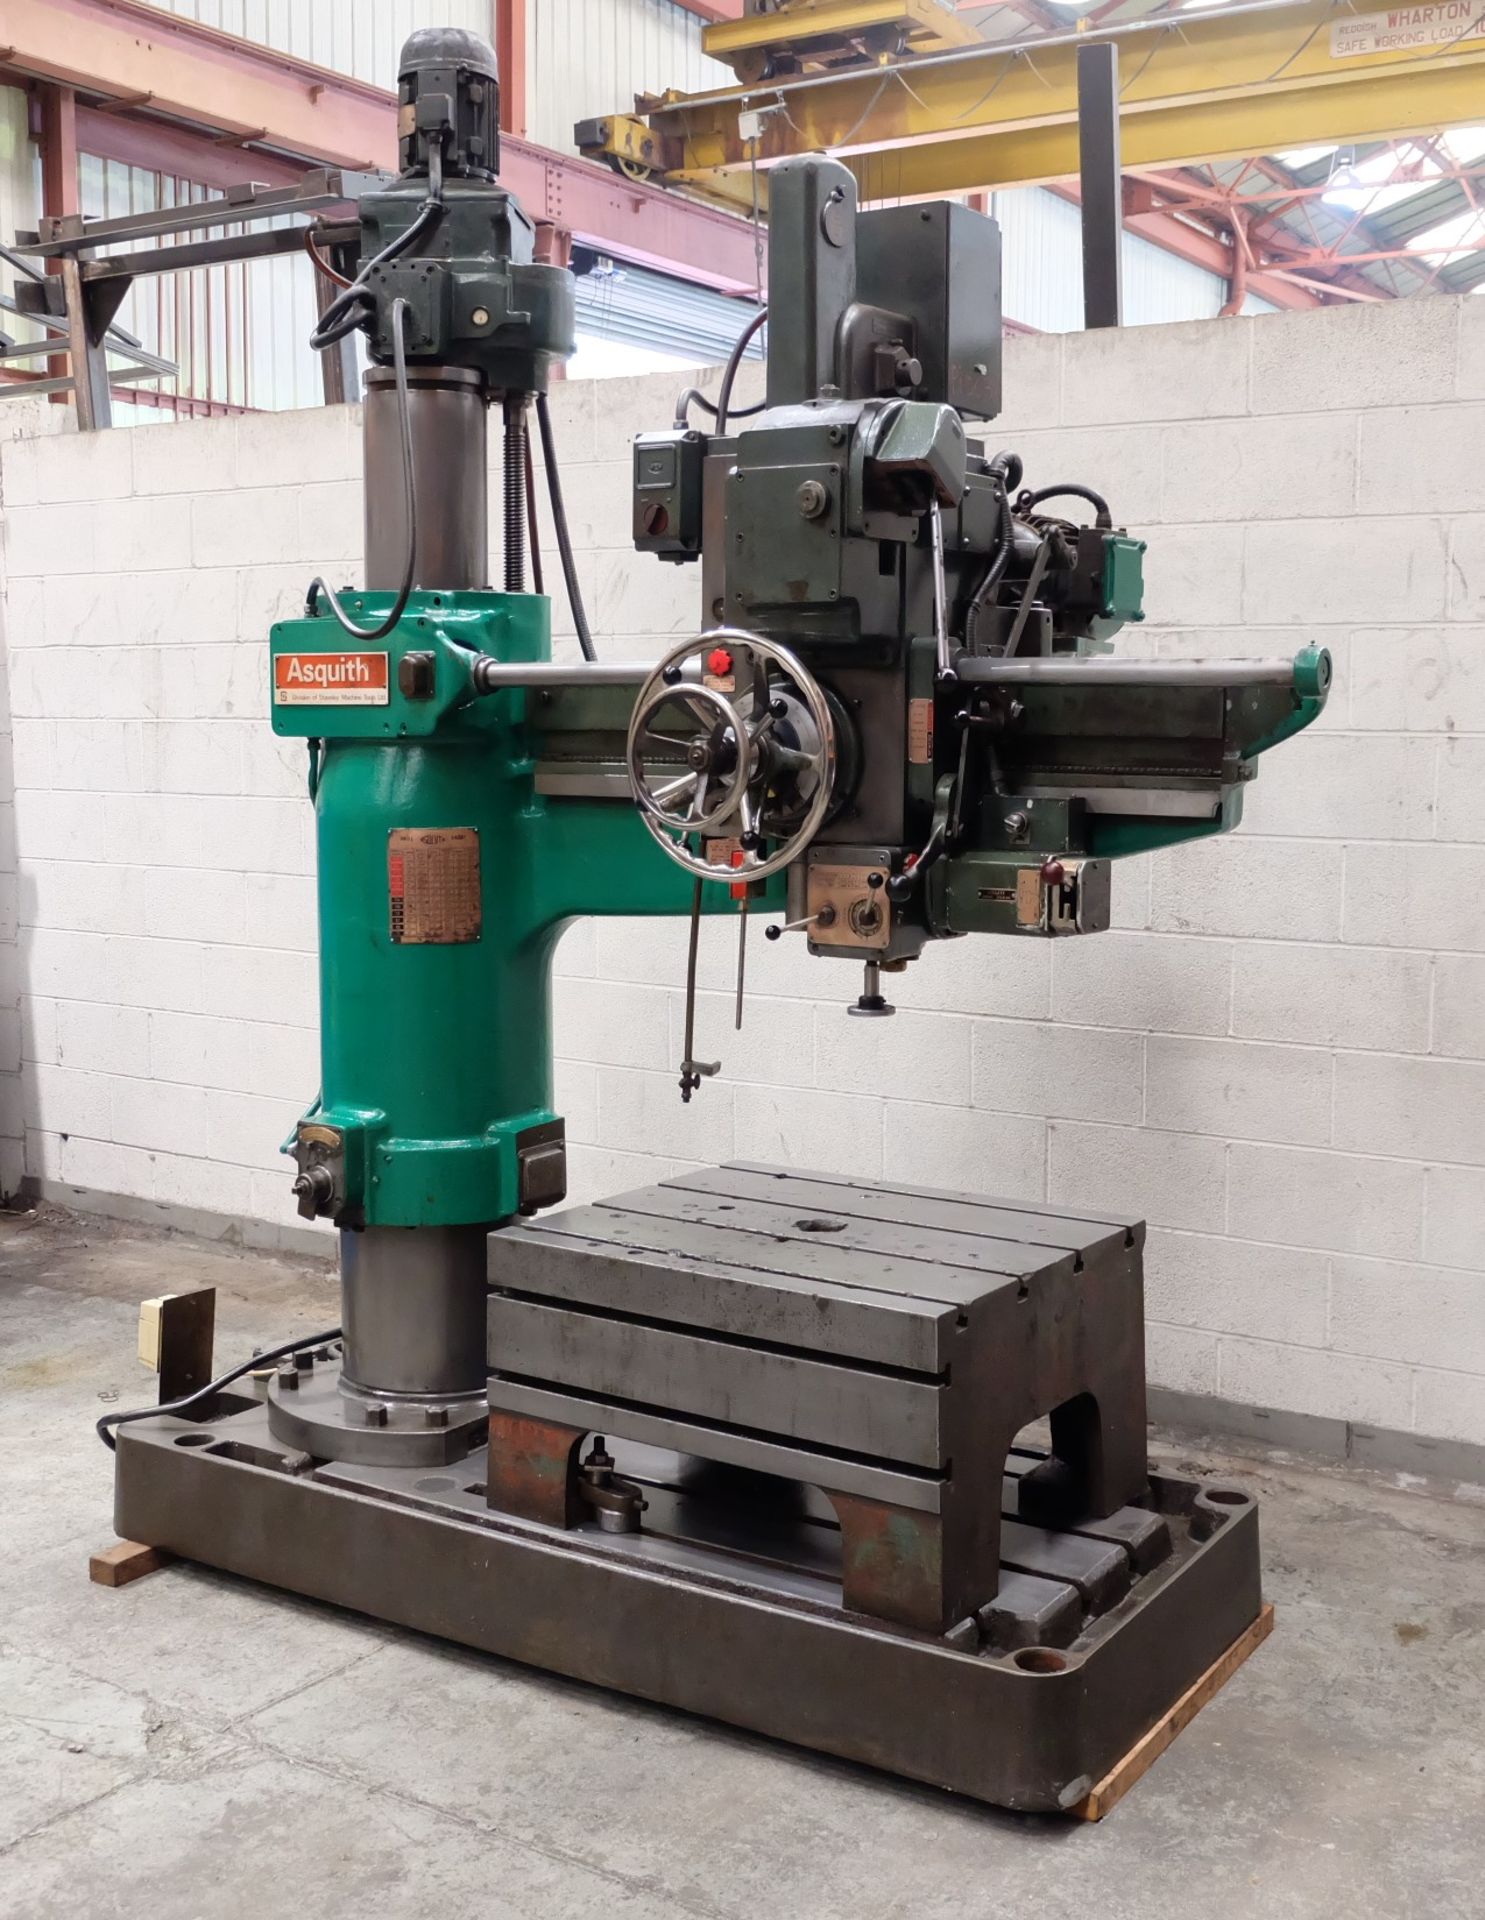 An Asquith OD1 4ft Radial Arm Drill.